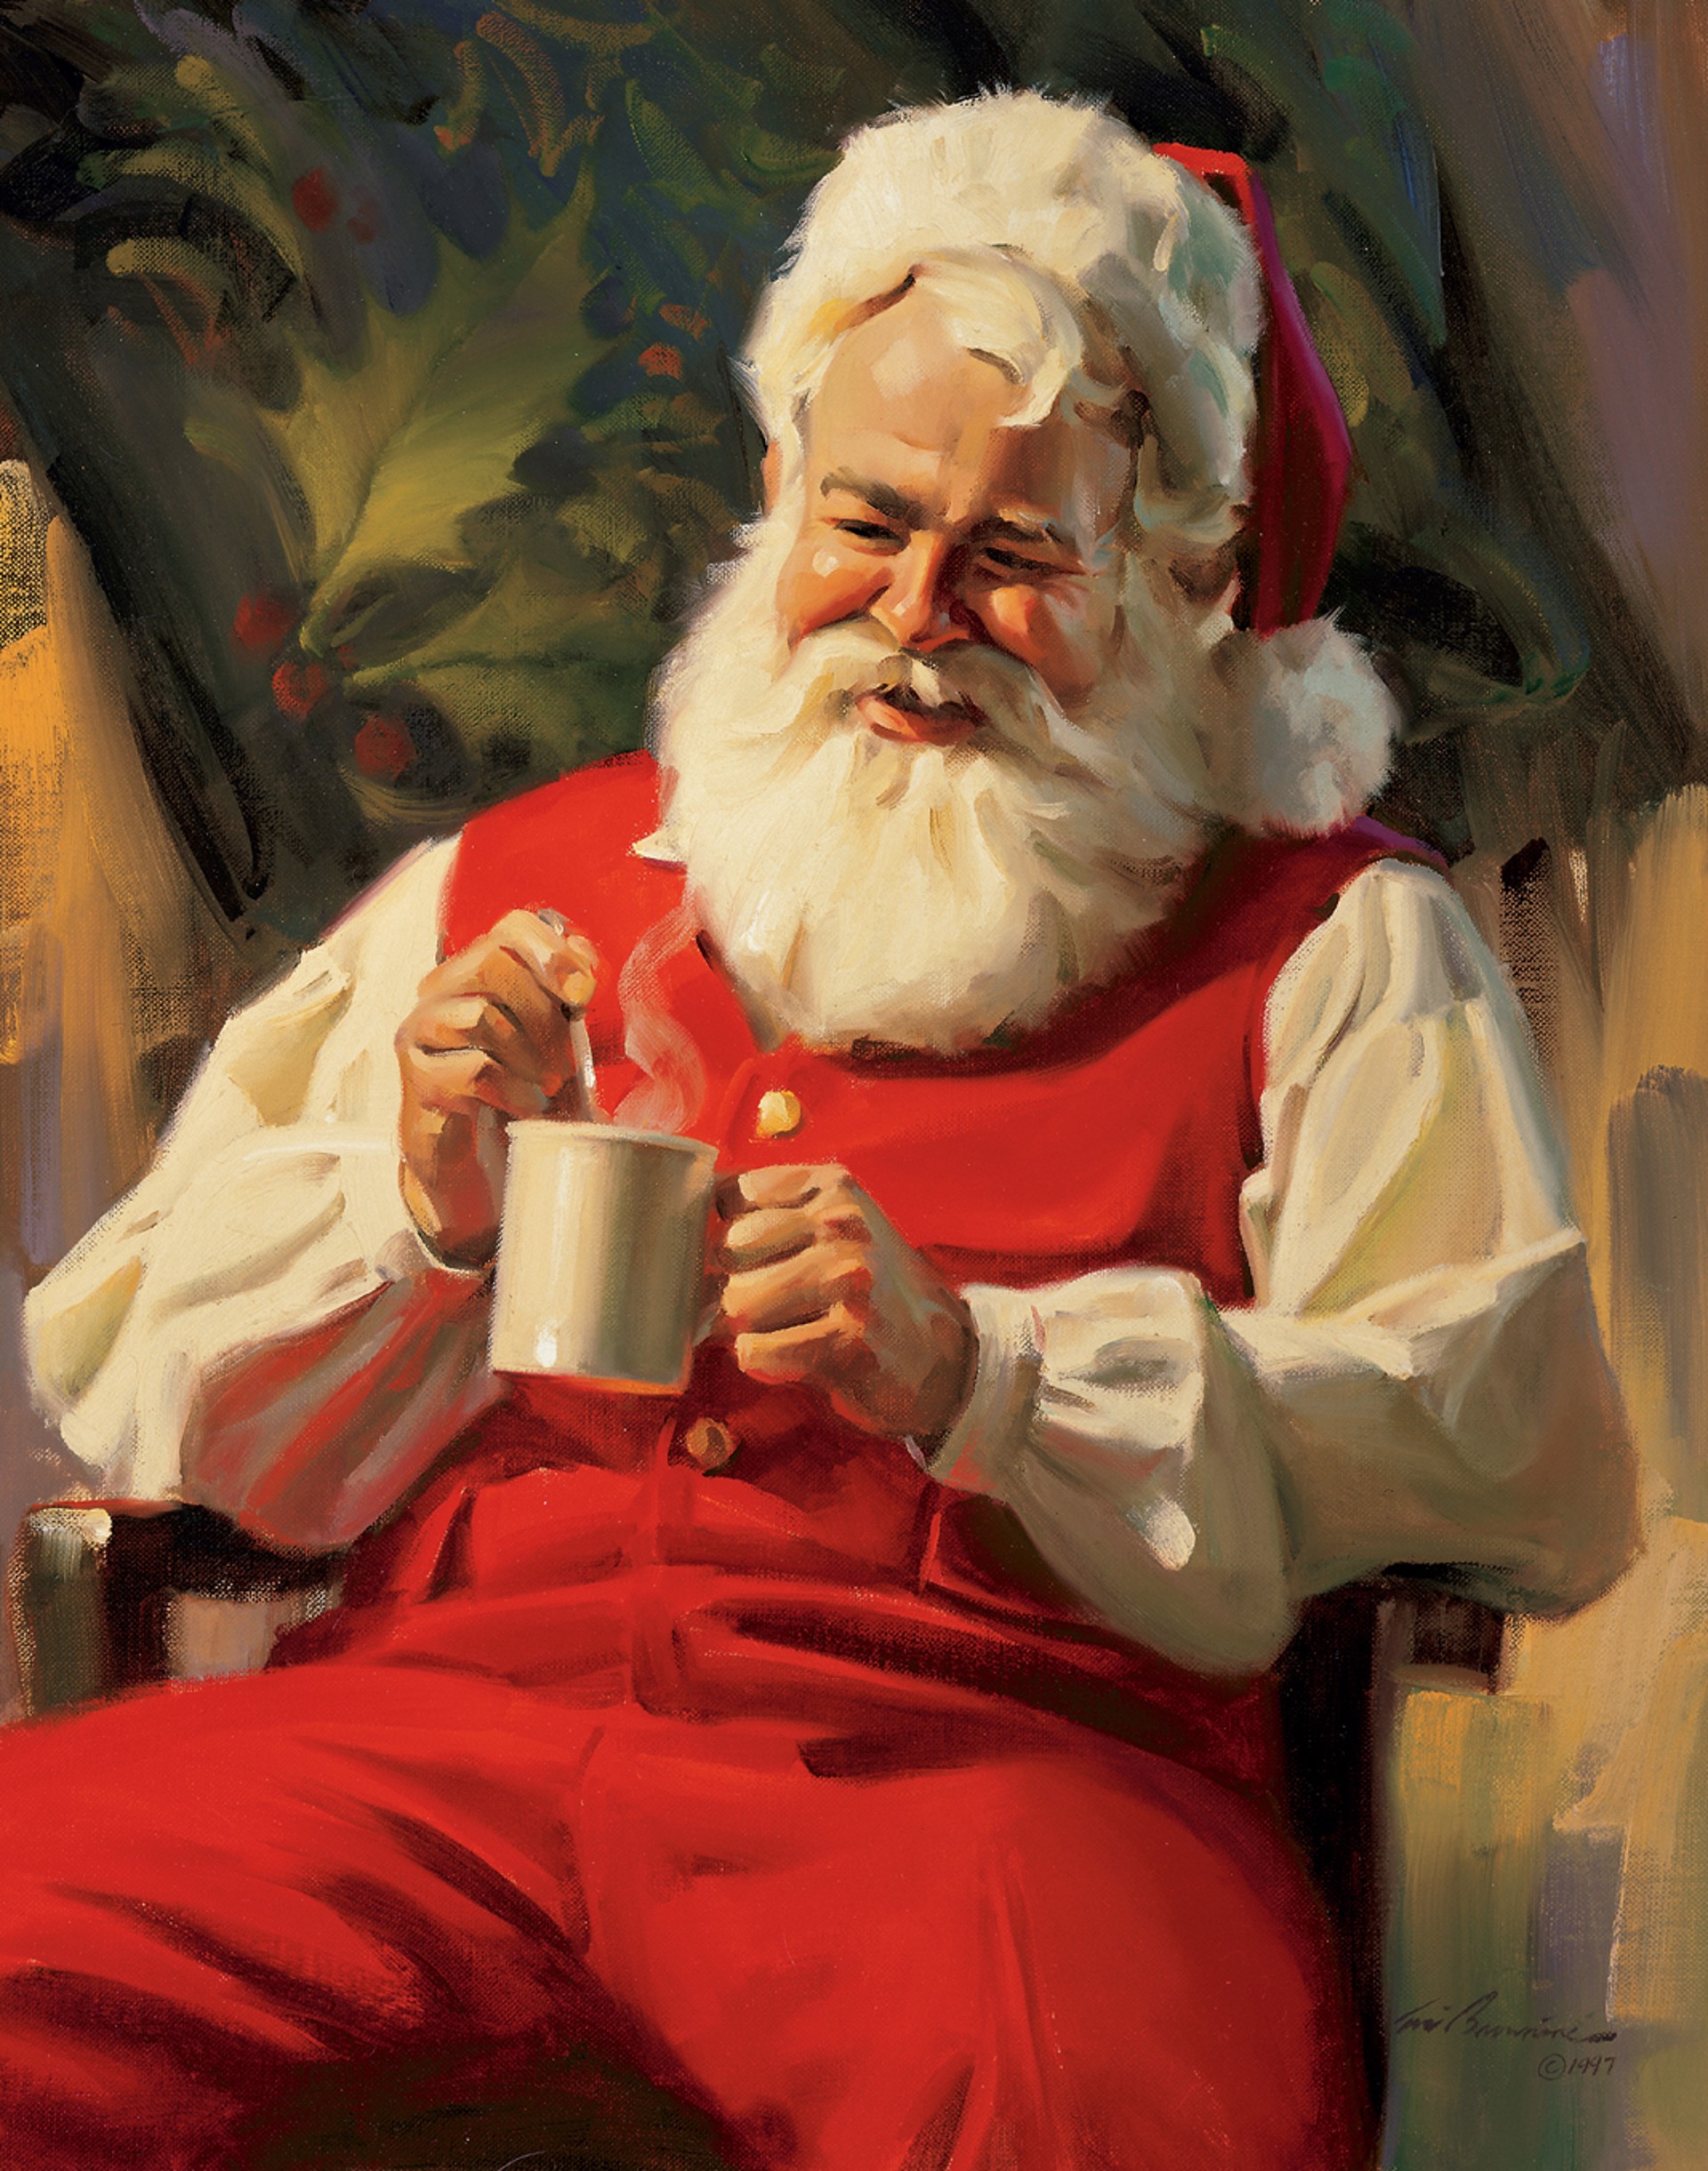 Santa's Special Blend by Tom Browning